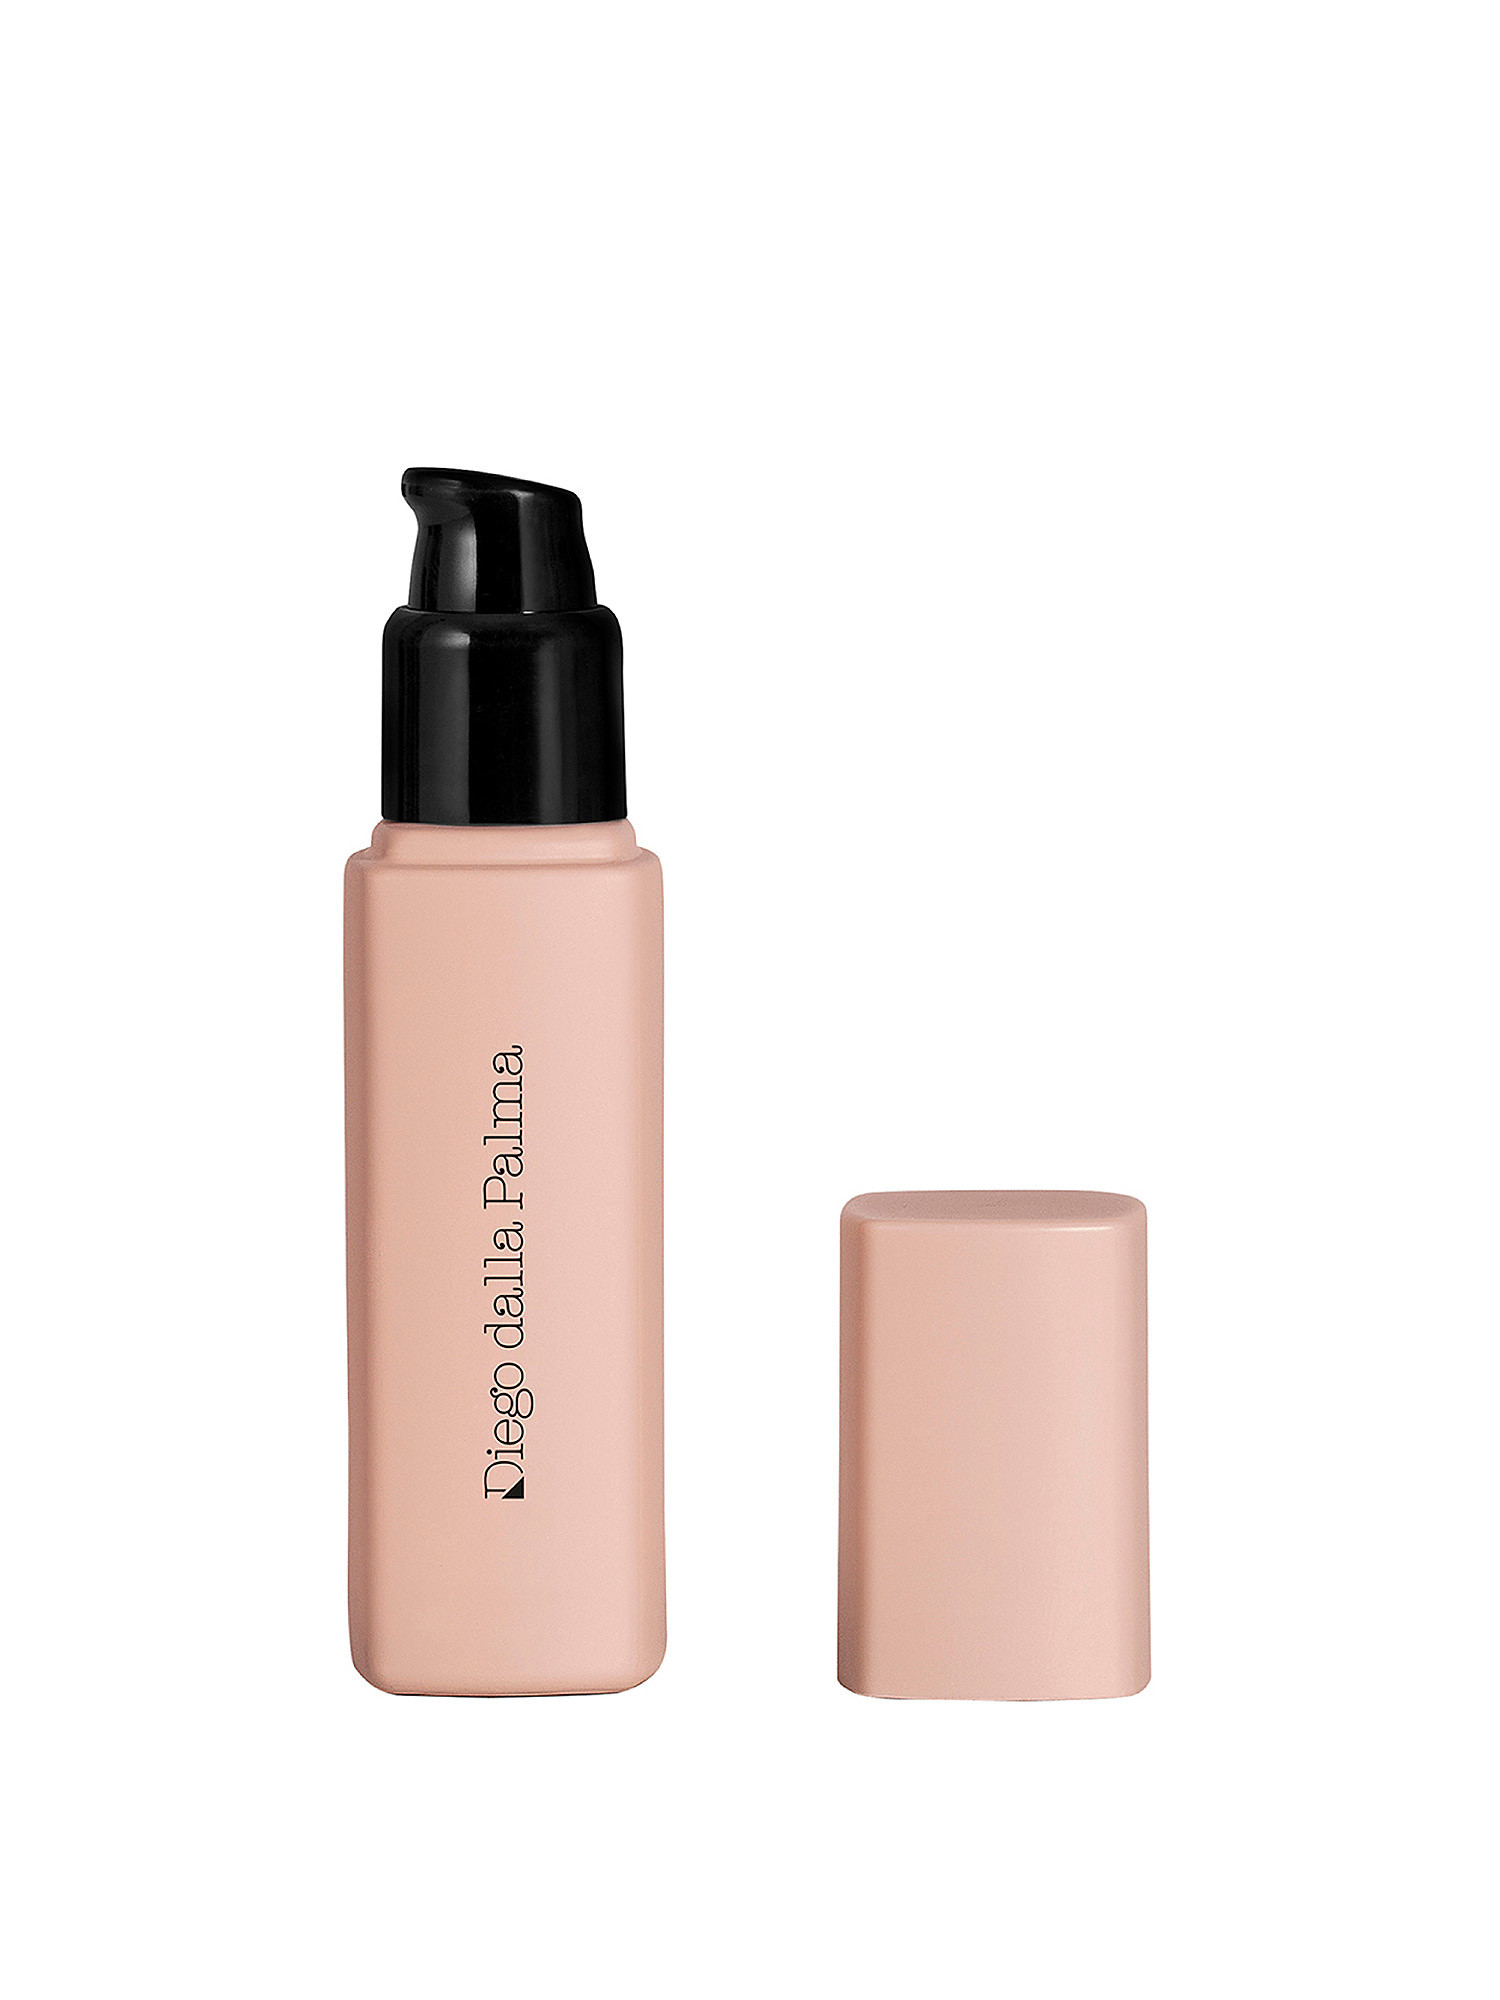 NUDISSIMO Naturally Matt Foundation - 246W, Natural, large image number 0